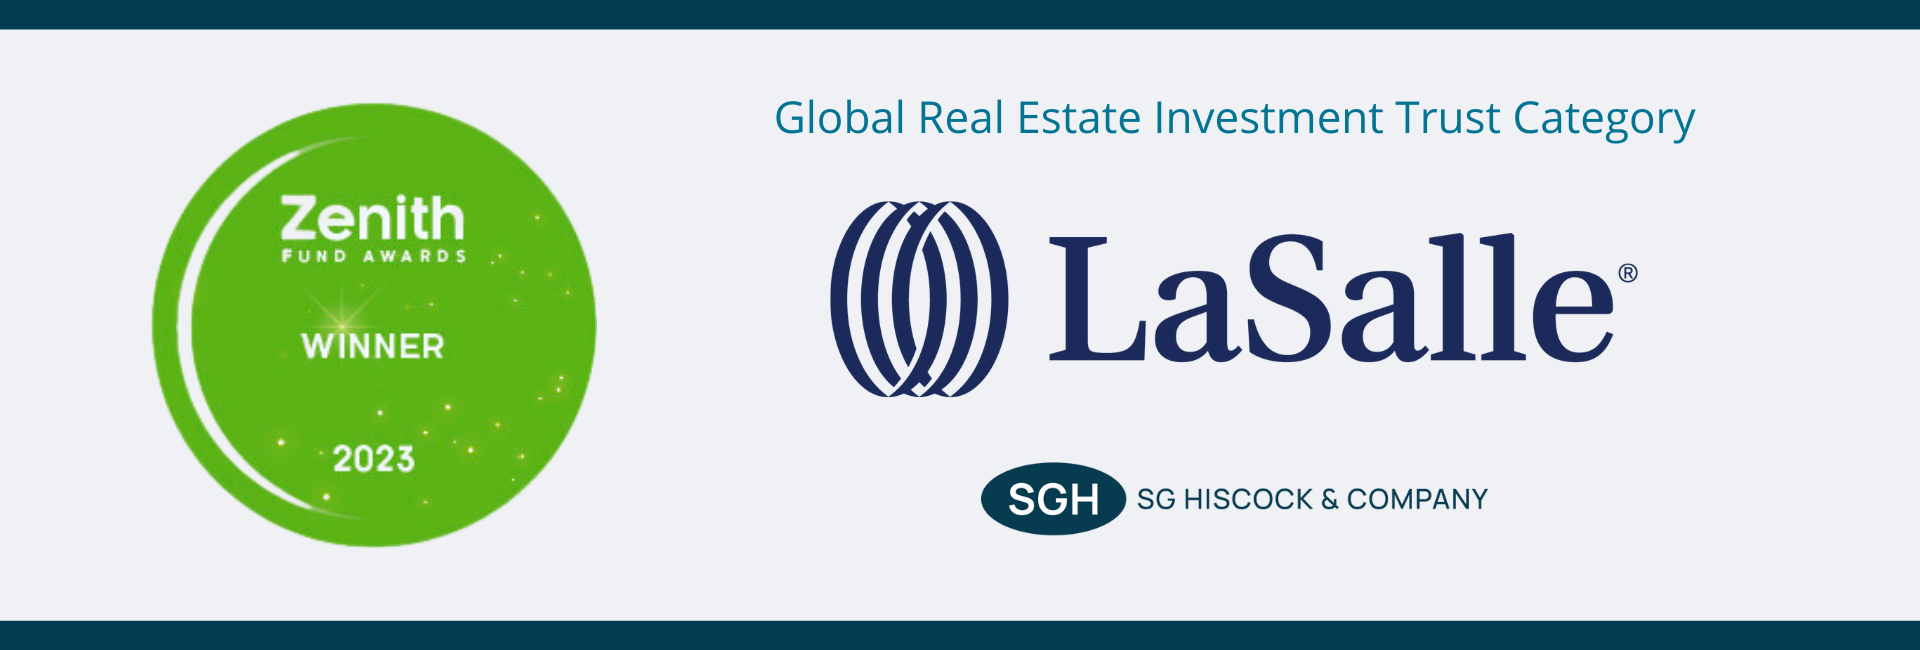 LaSalle wins 2023 Zenith Fund Award for the Global Real Estate Investment Trust category